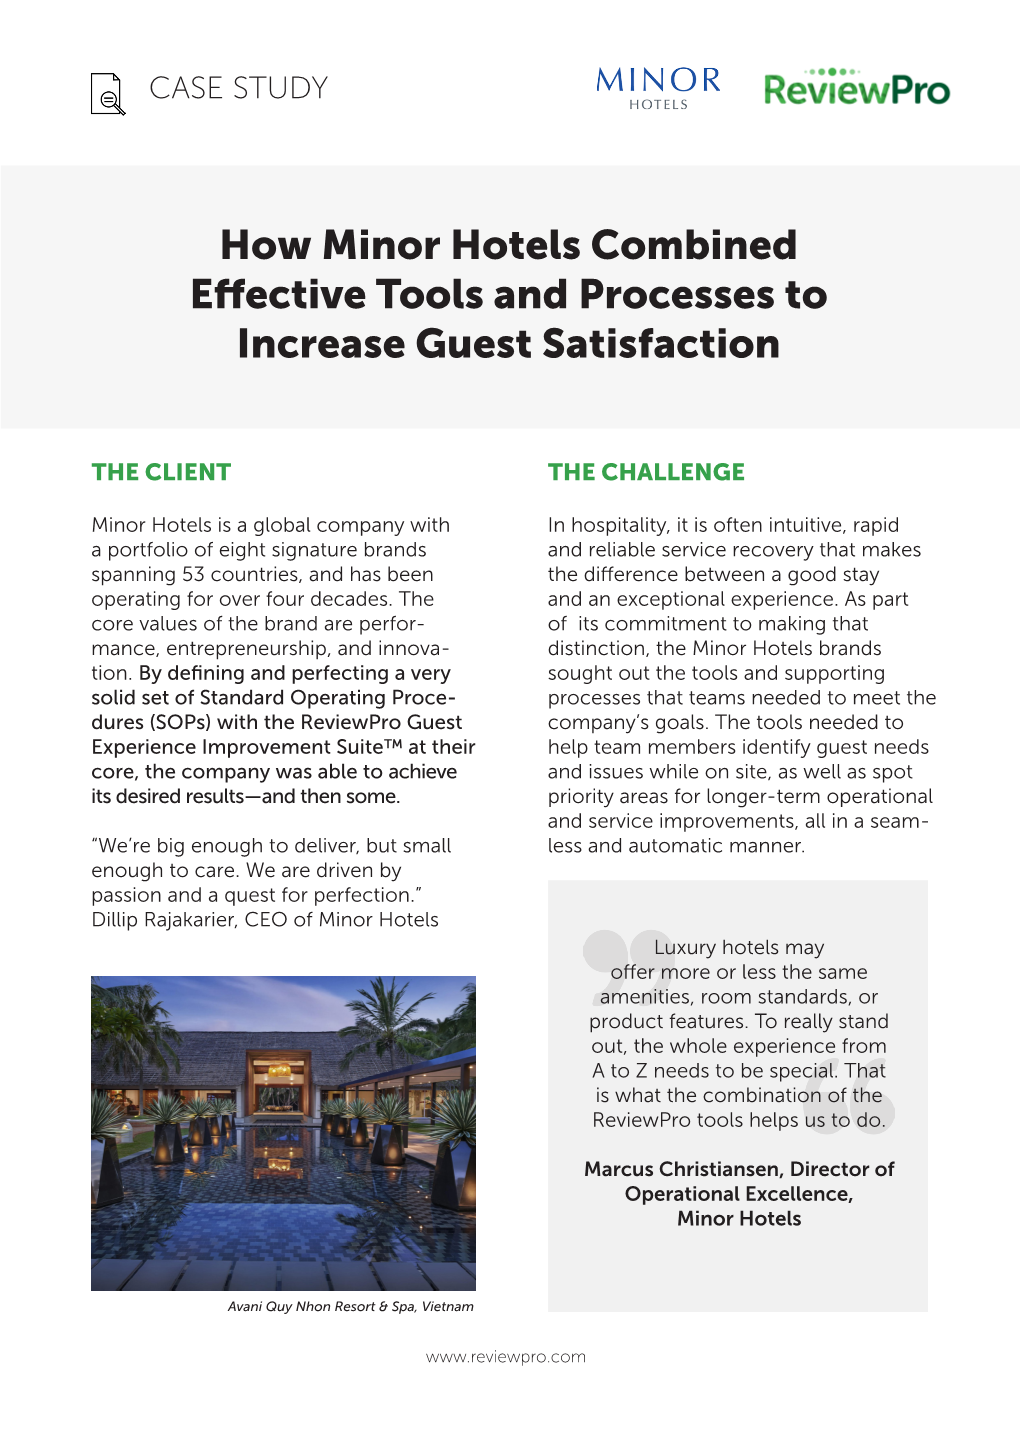 How Minor Hotels Combined Effective Tools and Processes to Increase Guest Satisfaction